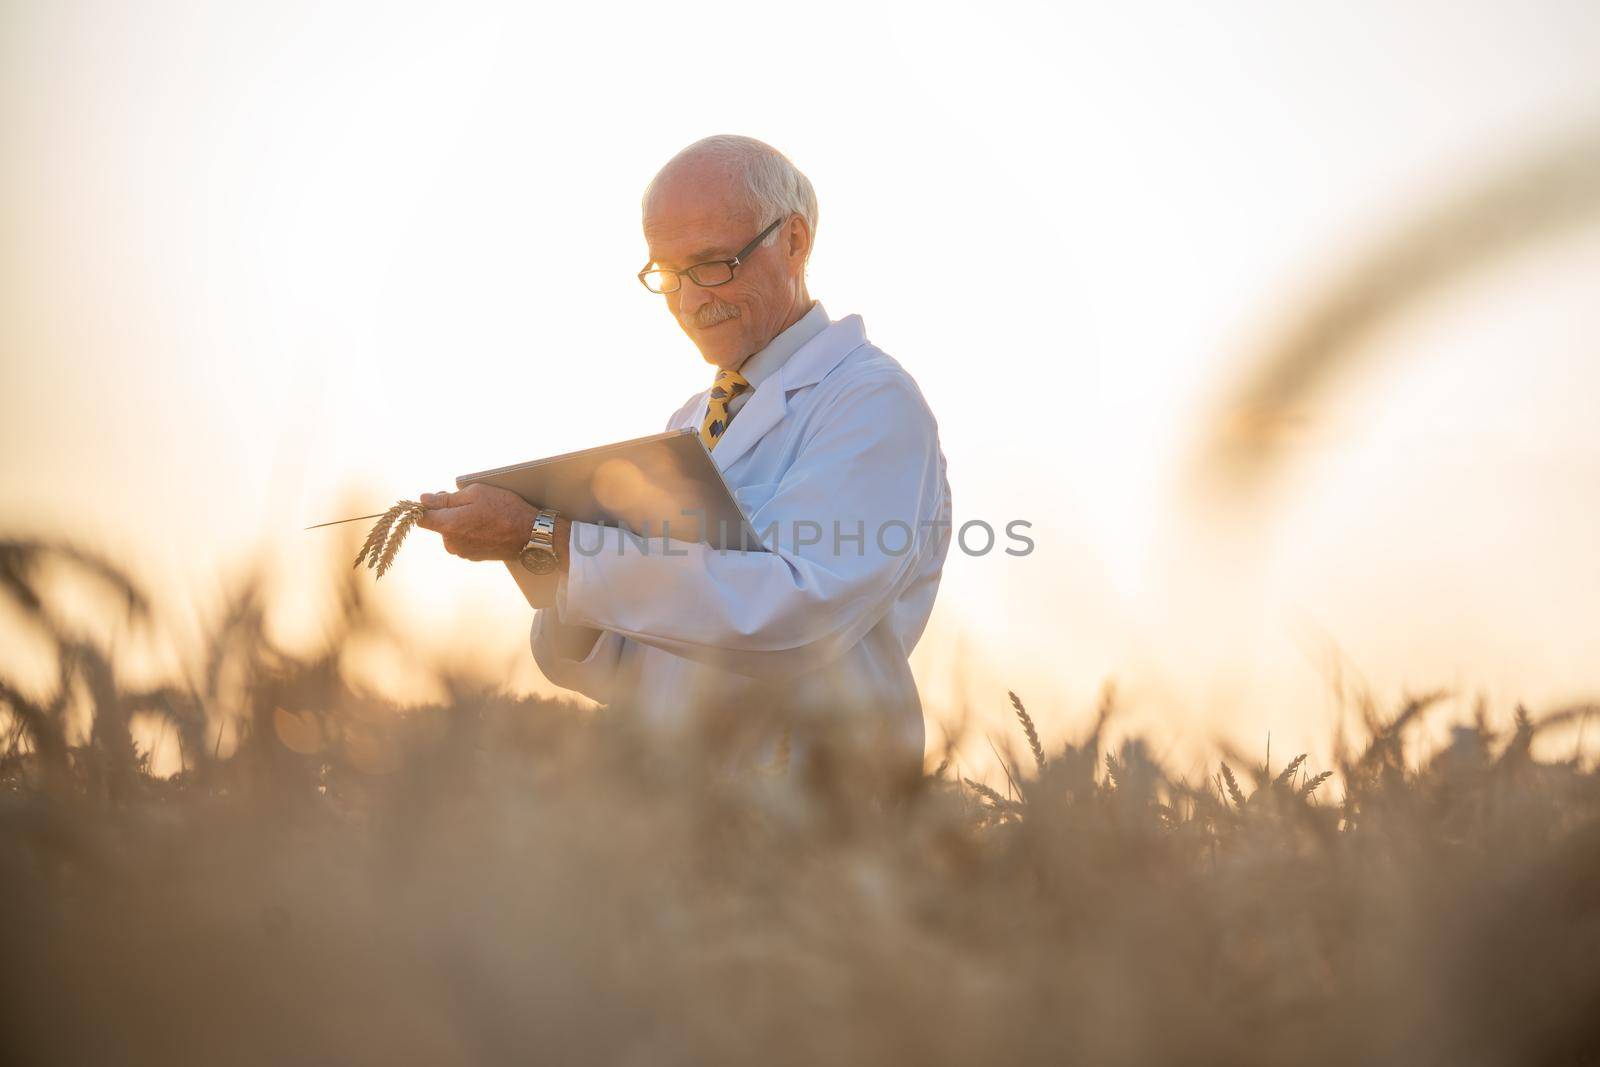 Man doing research on genetically modified grain in wheat field, he is an agricultural scientist